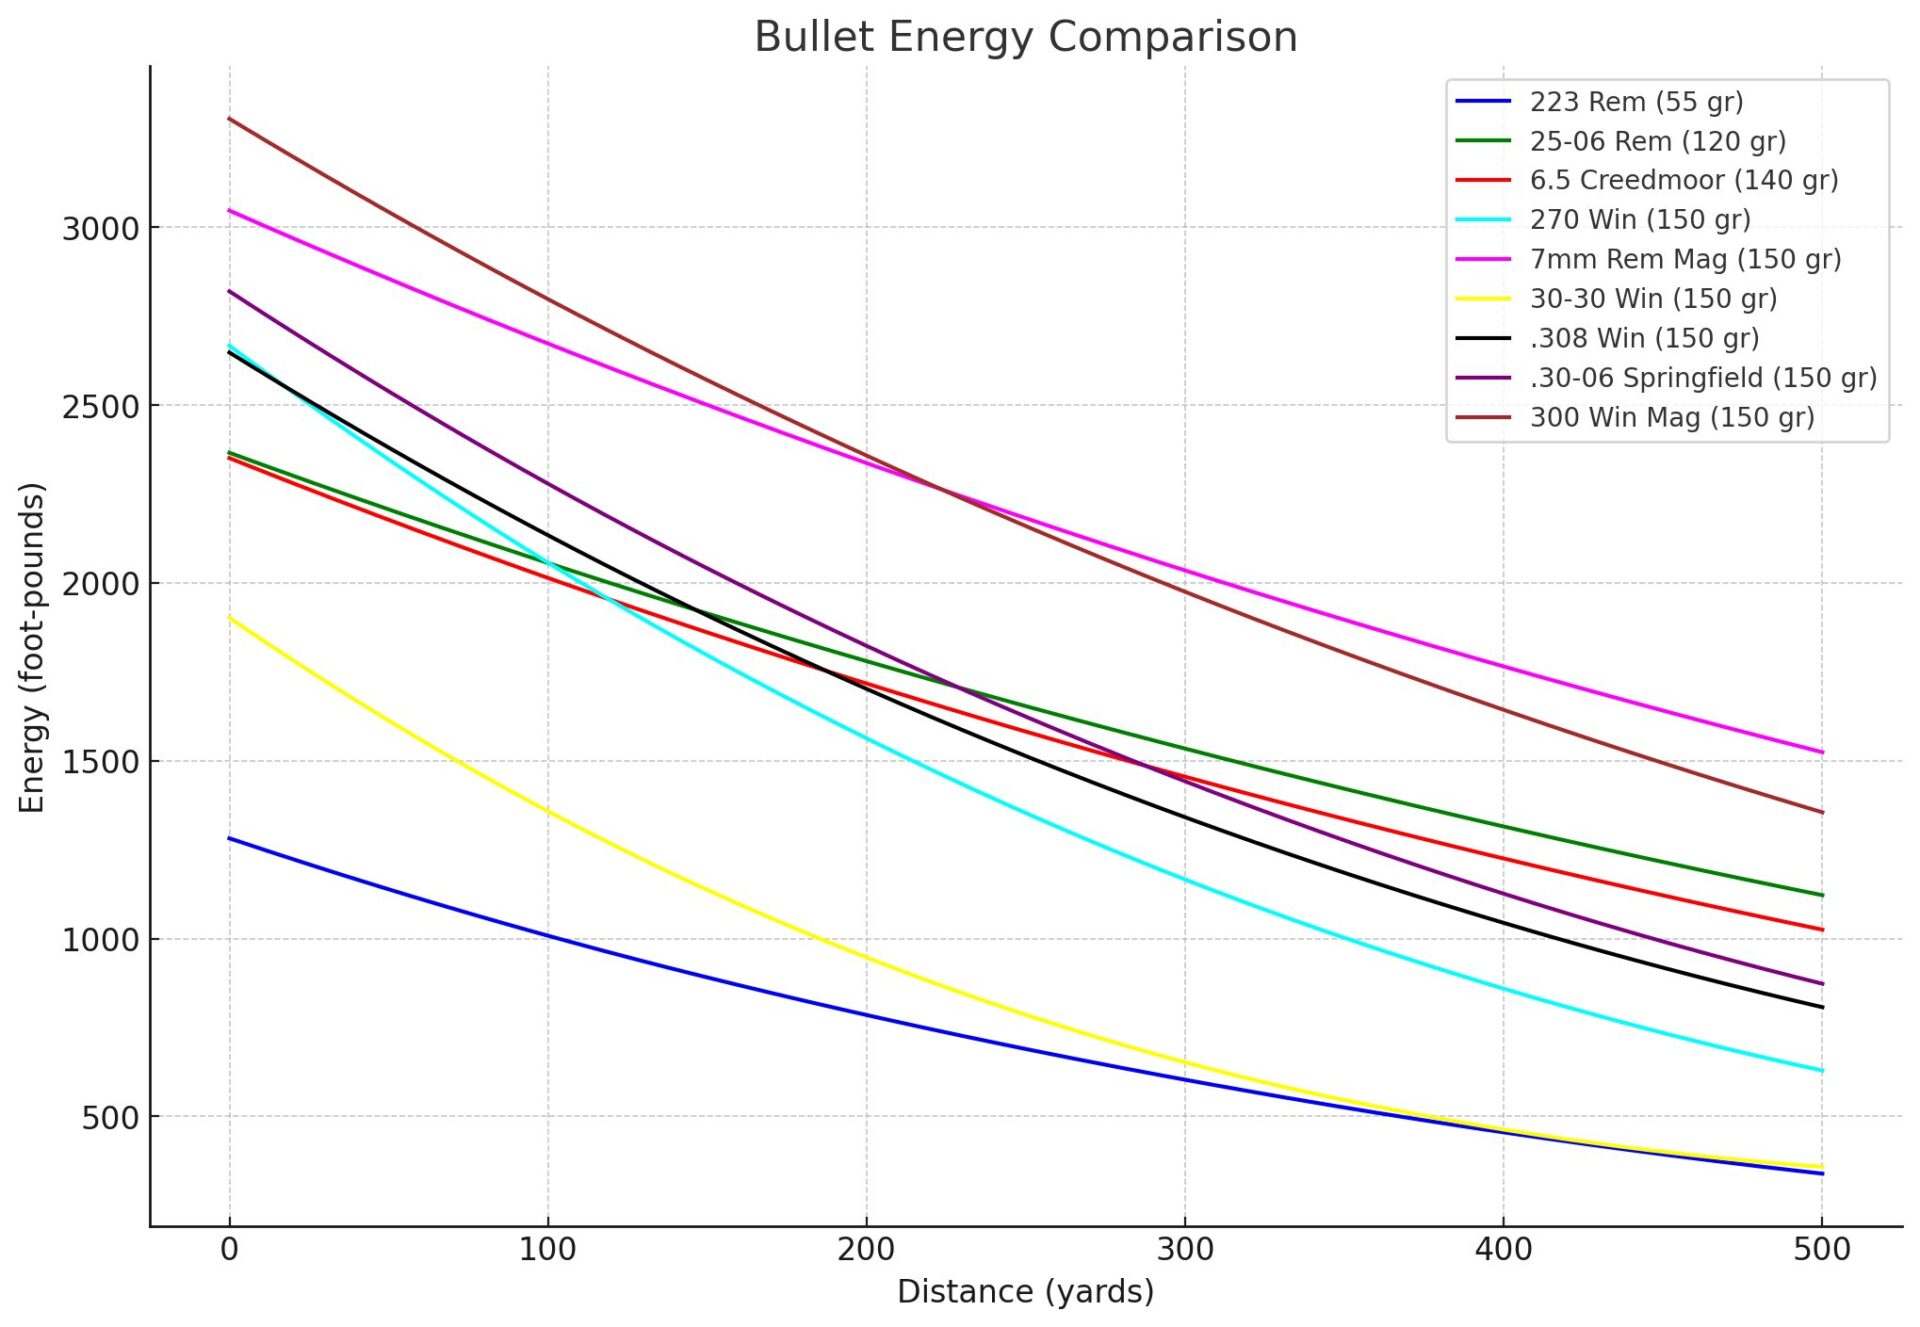 Bullet Energy Comparison of the 30-06 Springfield,308 Win, 270 Win, 6.5 Creedmoor, 300 Win Mag, 7mm Rem Mag, 223 Rem, 30-30 Win, and 25-06 Rem